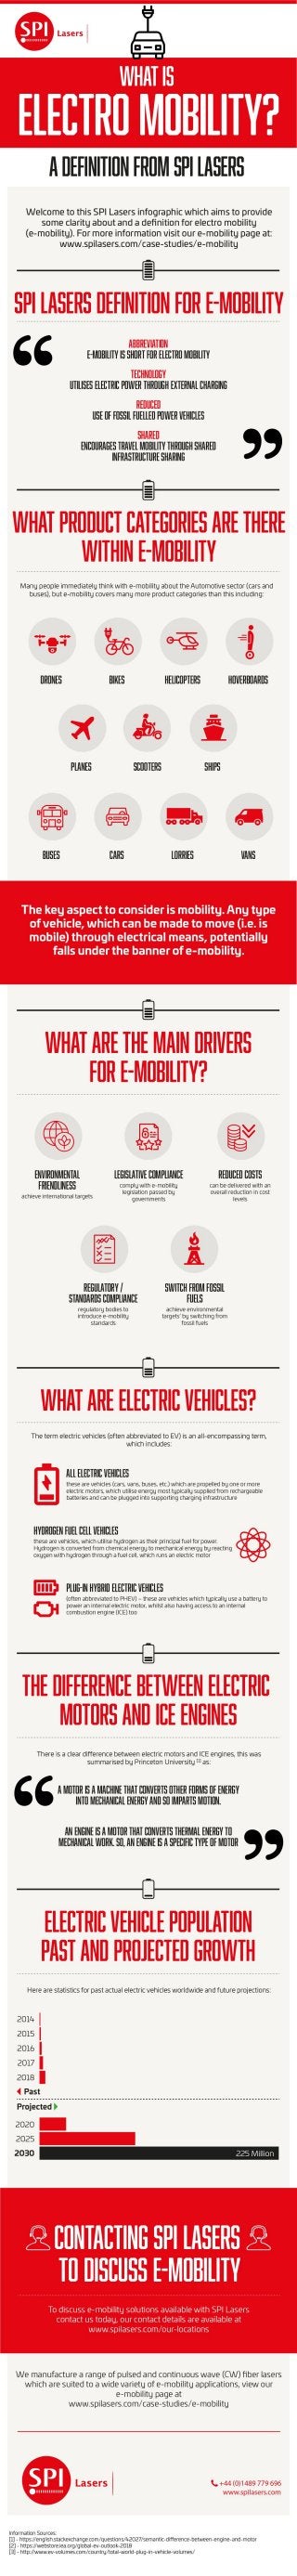 A ground-breaking infographic has been created by SPI Lasers that provides us with a perspective on the future of transportation